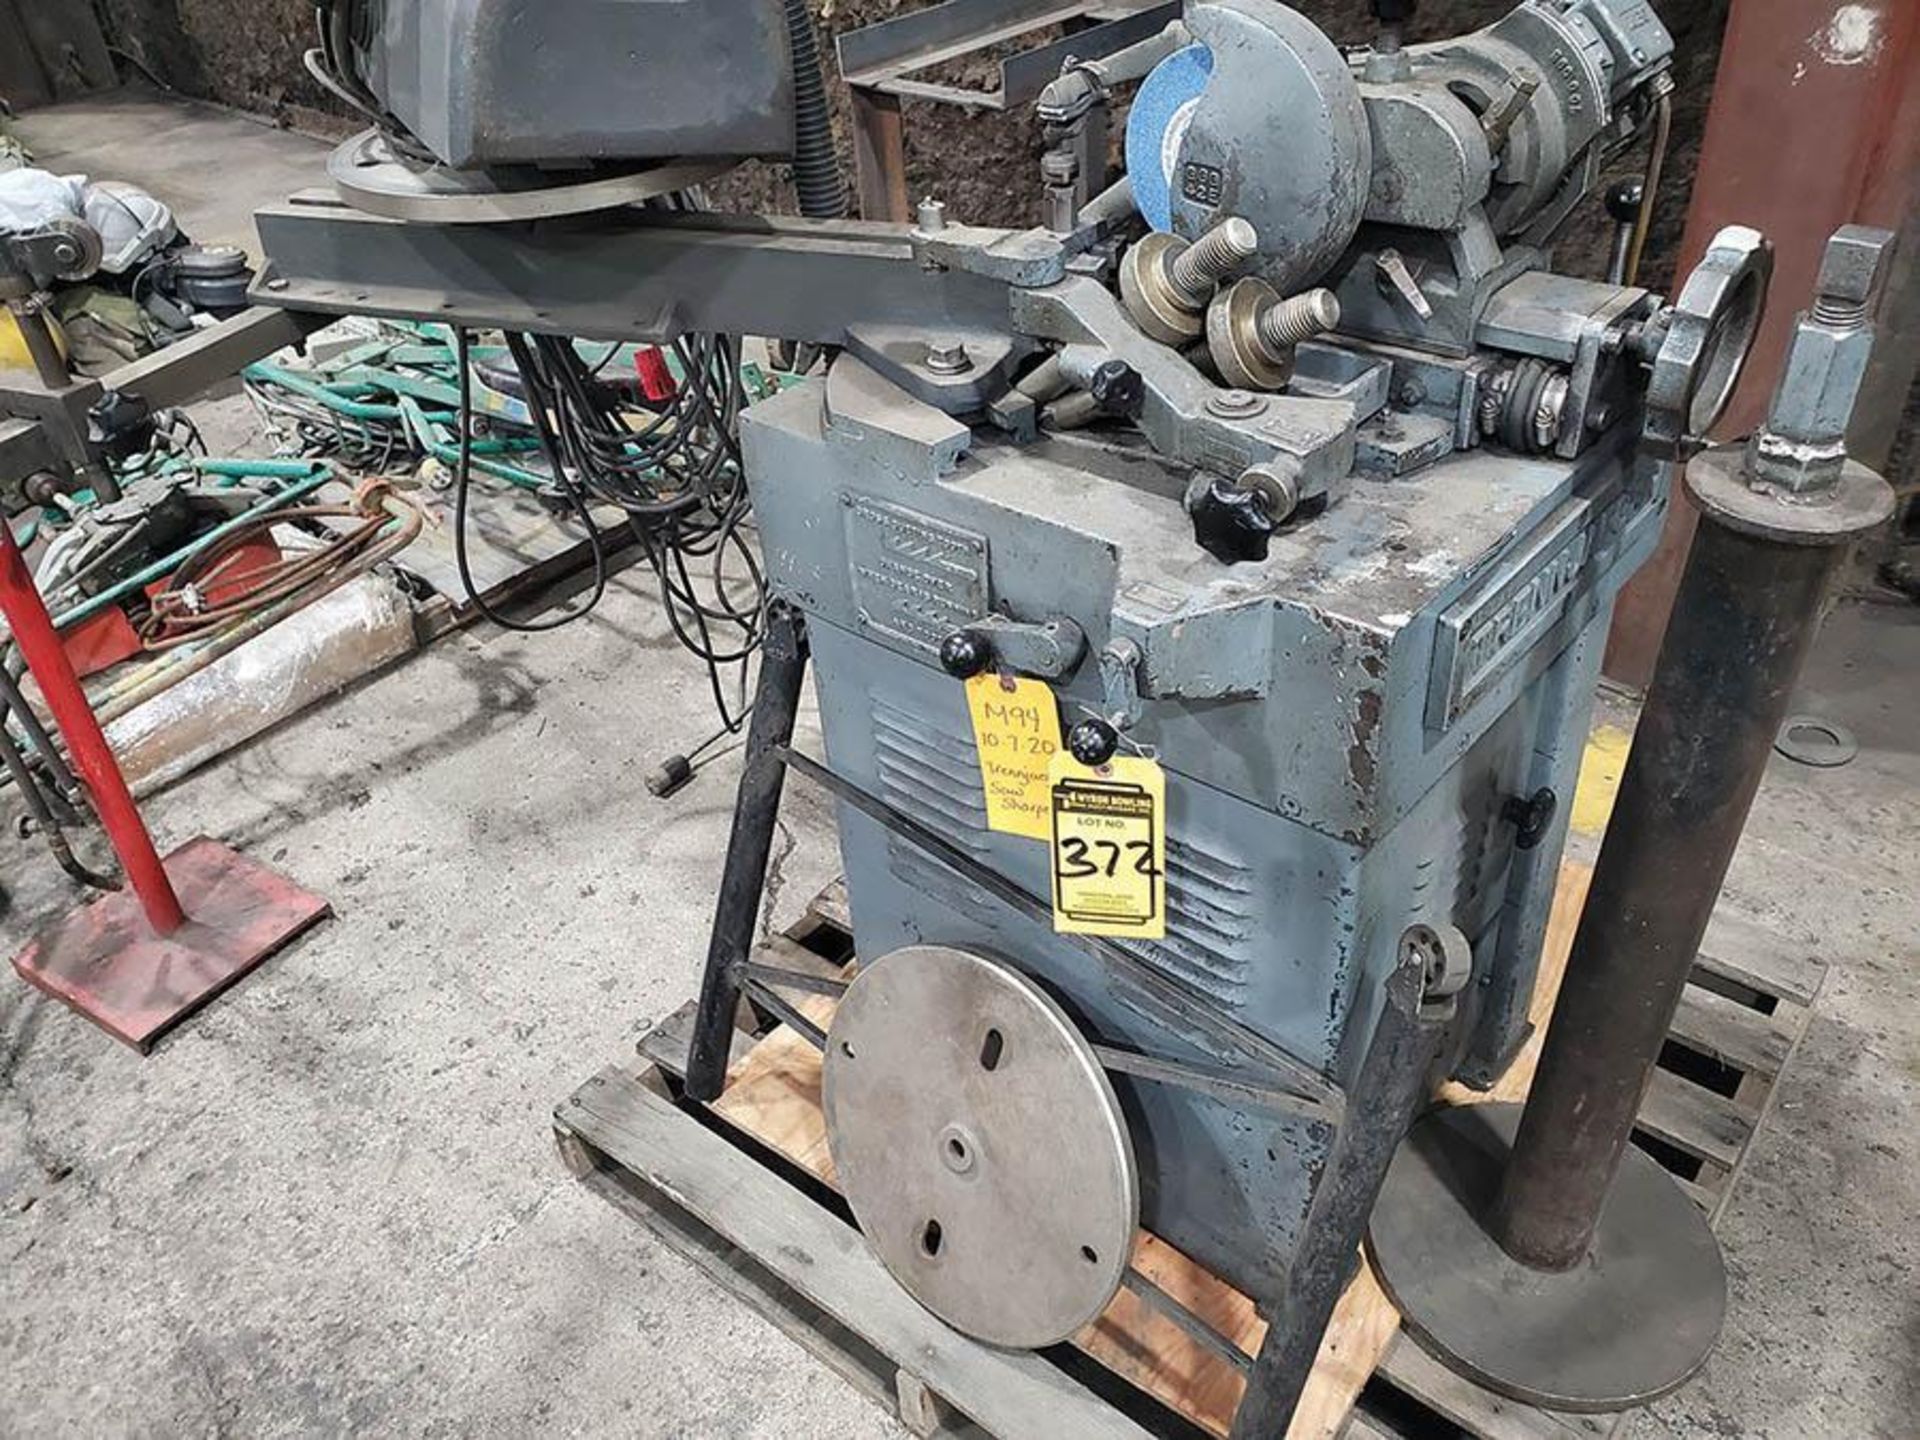 TRENJAEGER SAW SHARPENER, NO DATA PLATE, SOLD WITH DAYTON VAC AS PICTURED